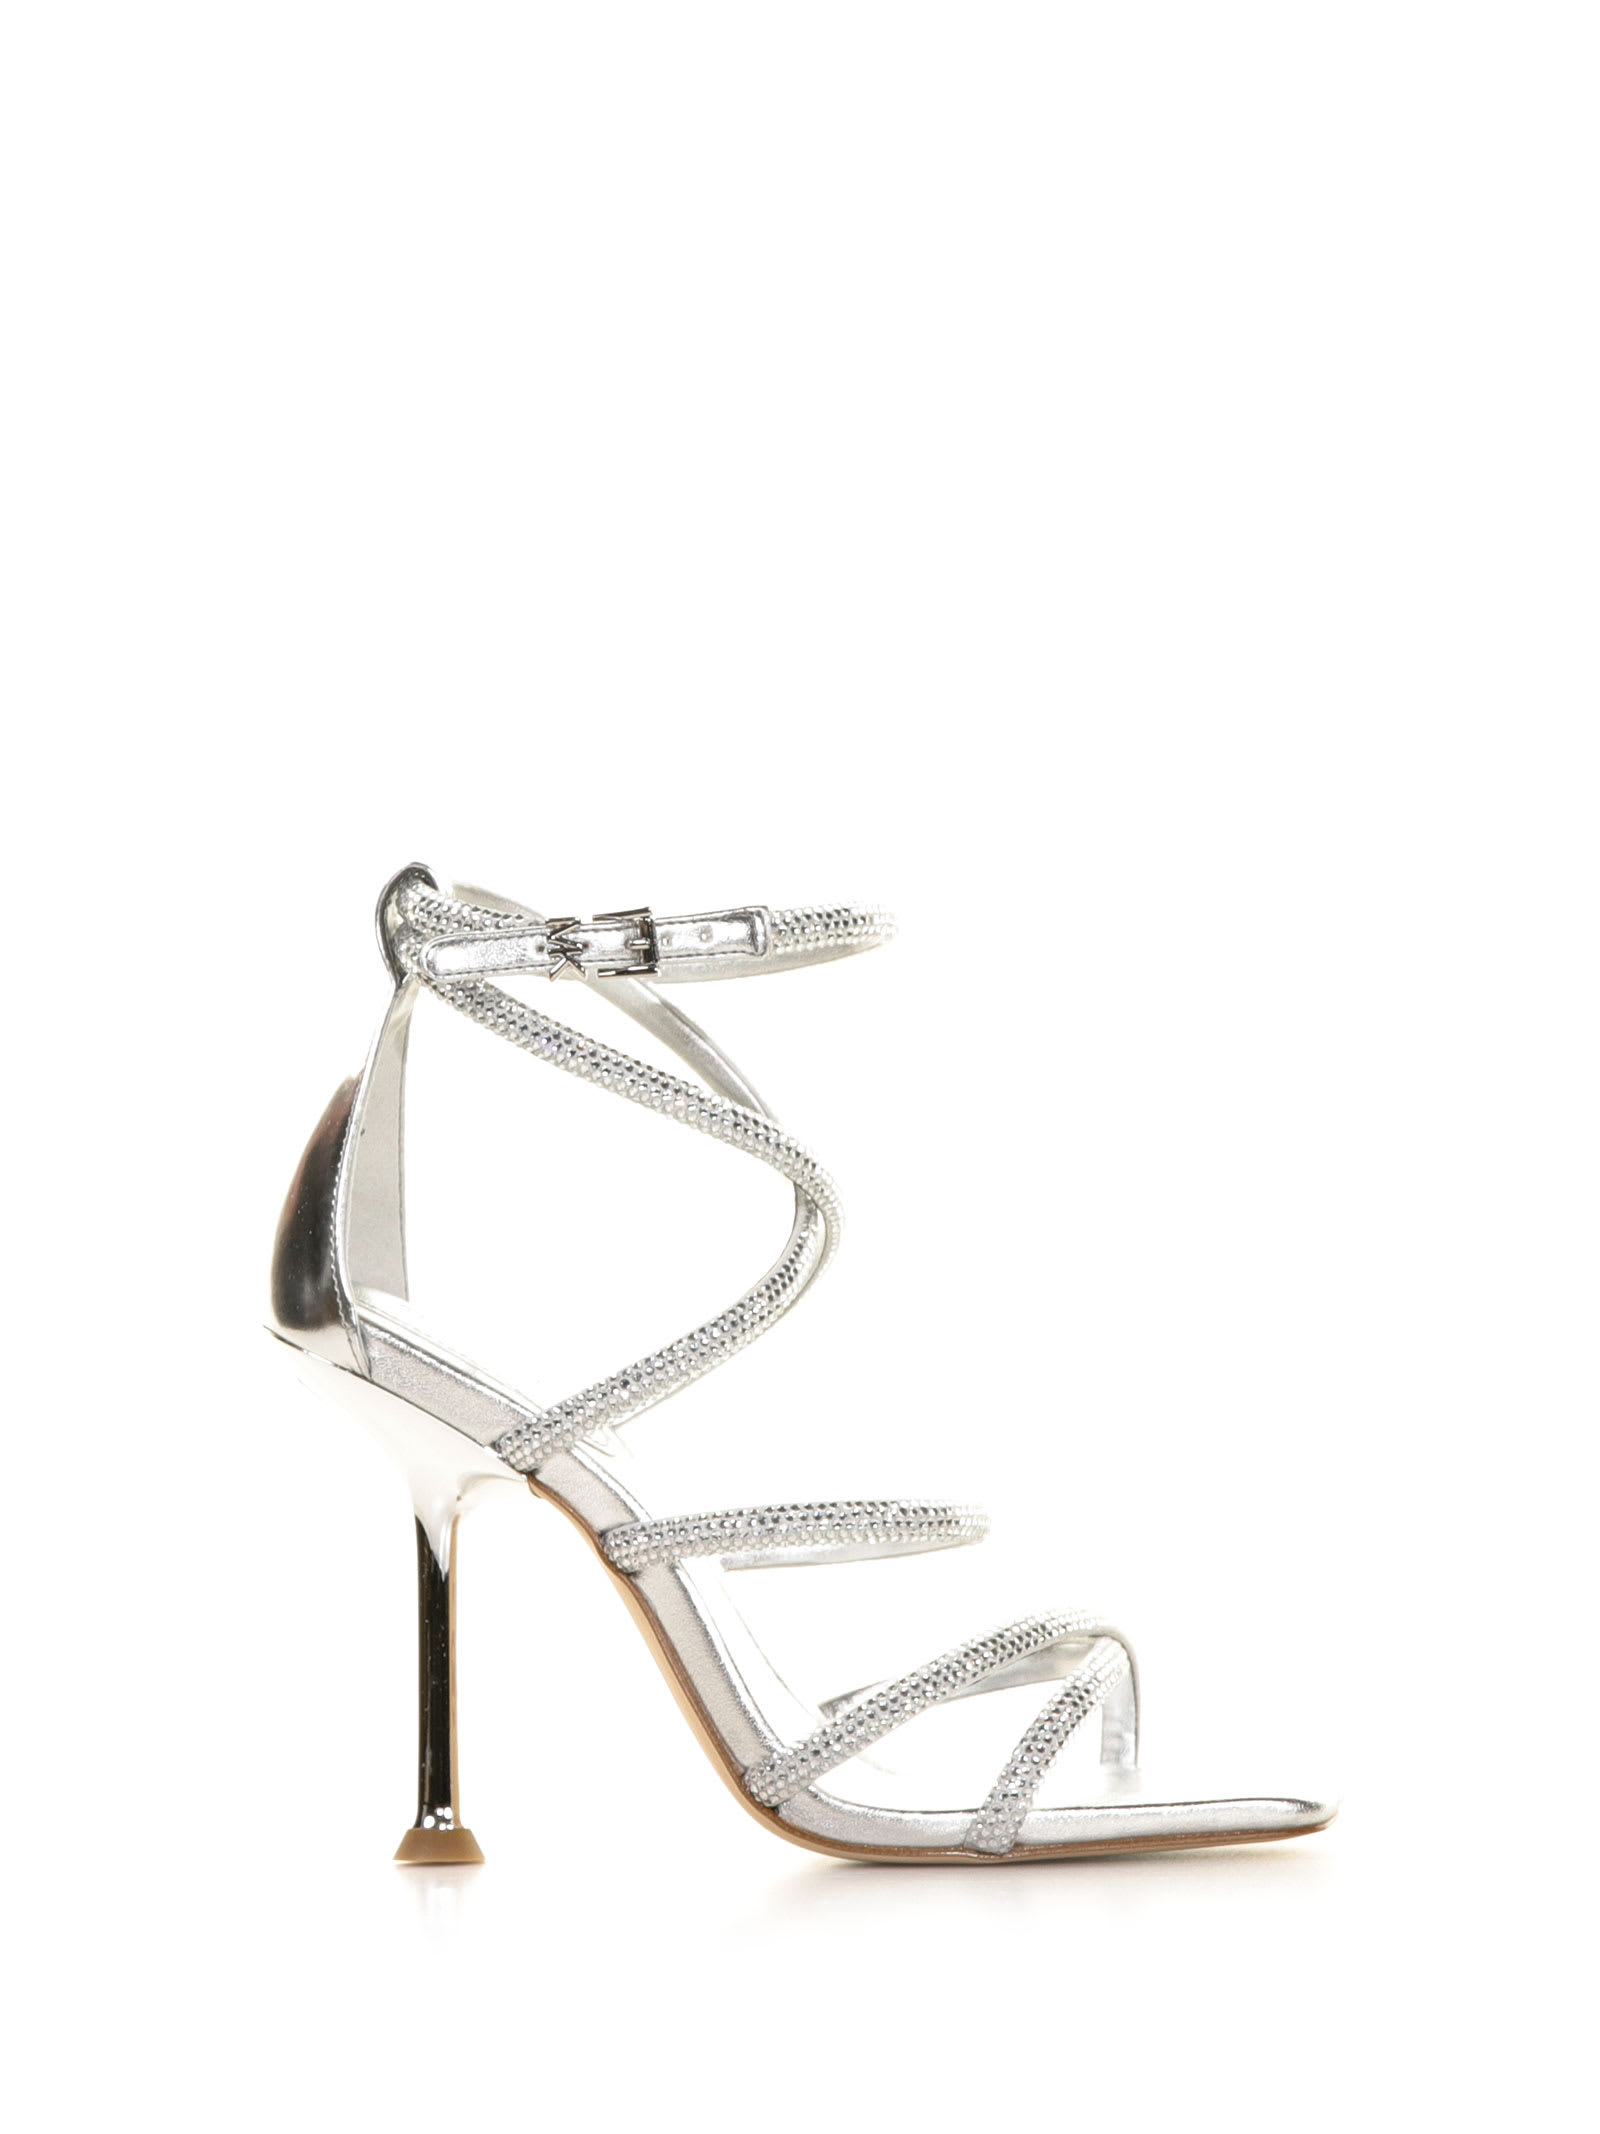 Michael Kors Leather Sandal With Glitter